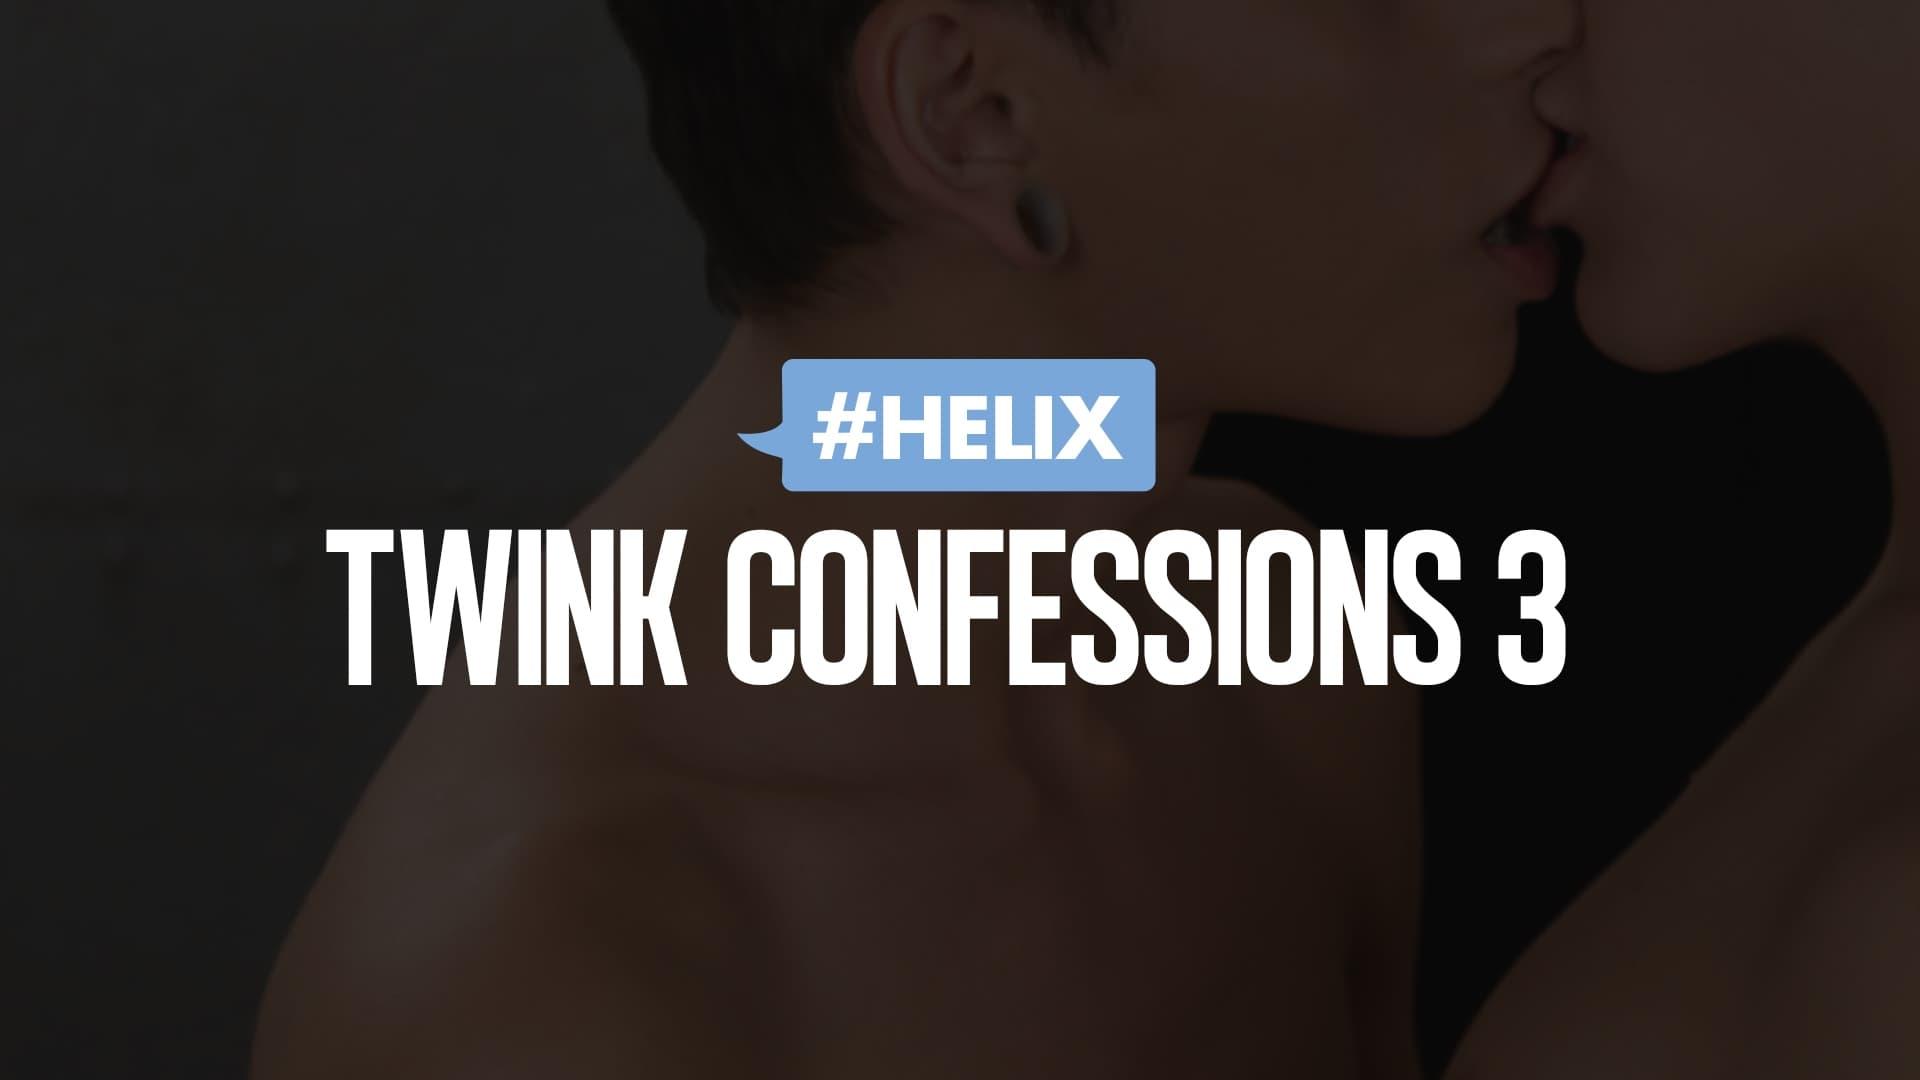 Twink Confessions 3 backdrop